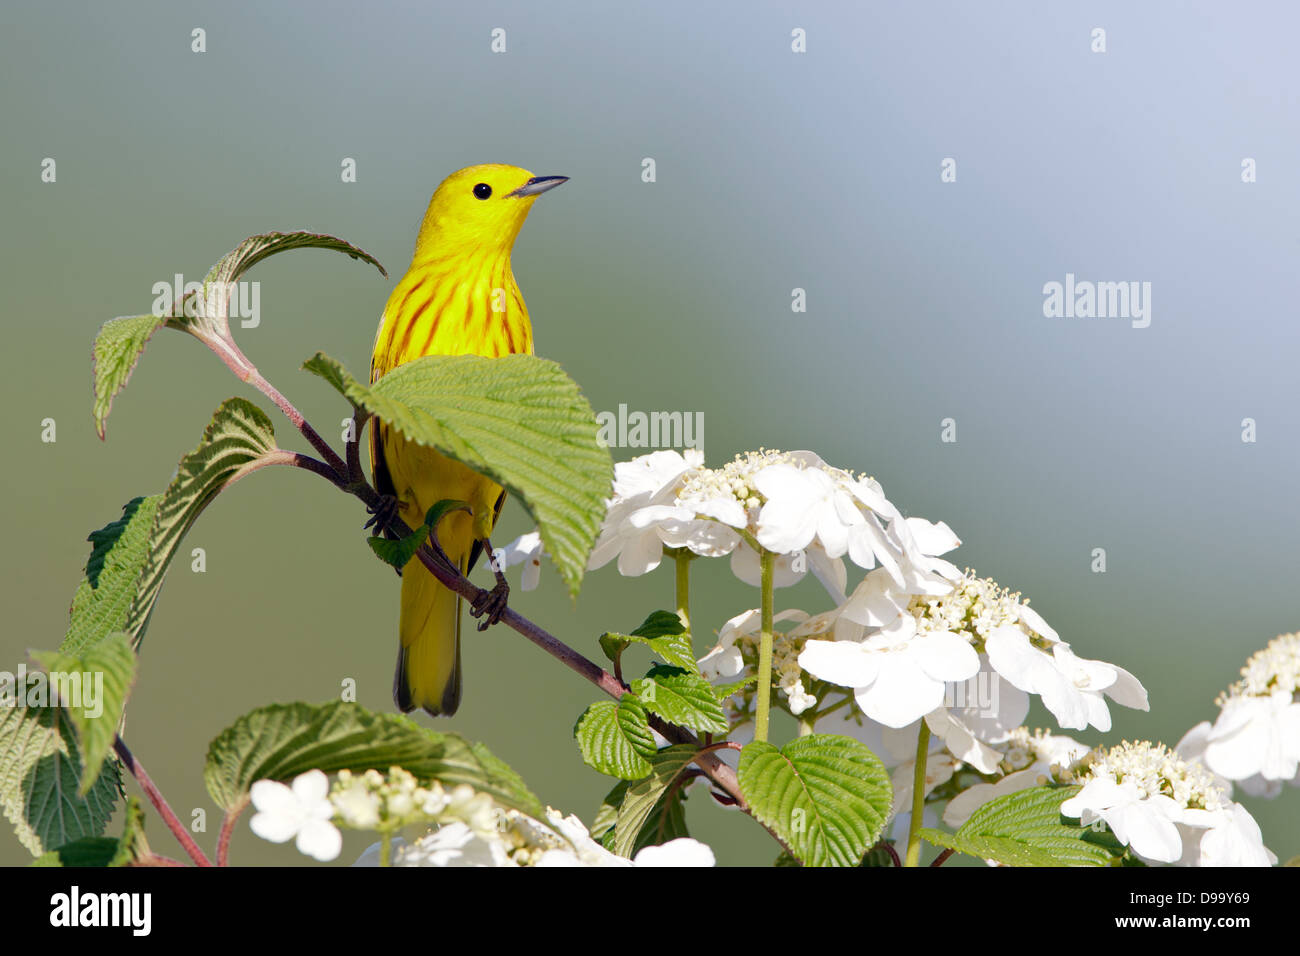 Yellow Warbler perching in Vibernum Blossoms bird songbird Ornithology Science Nature Wildlife Environment Stock Photo